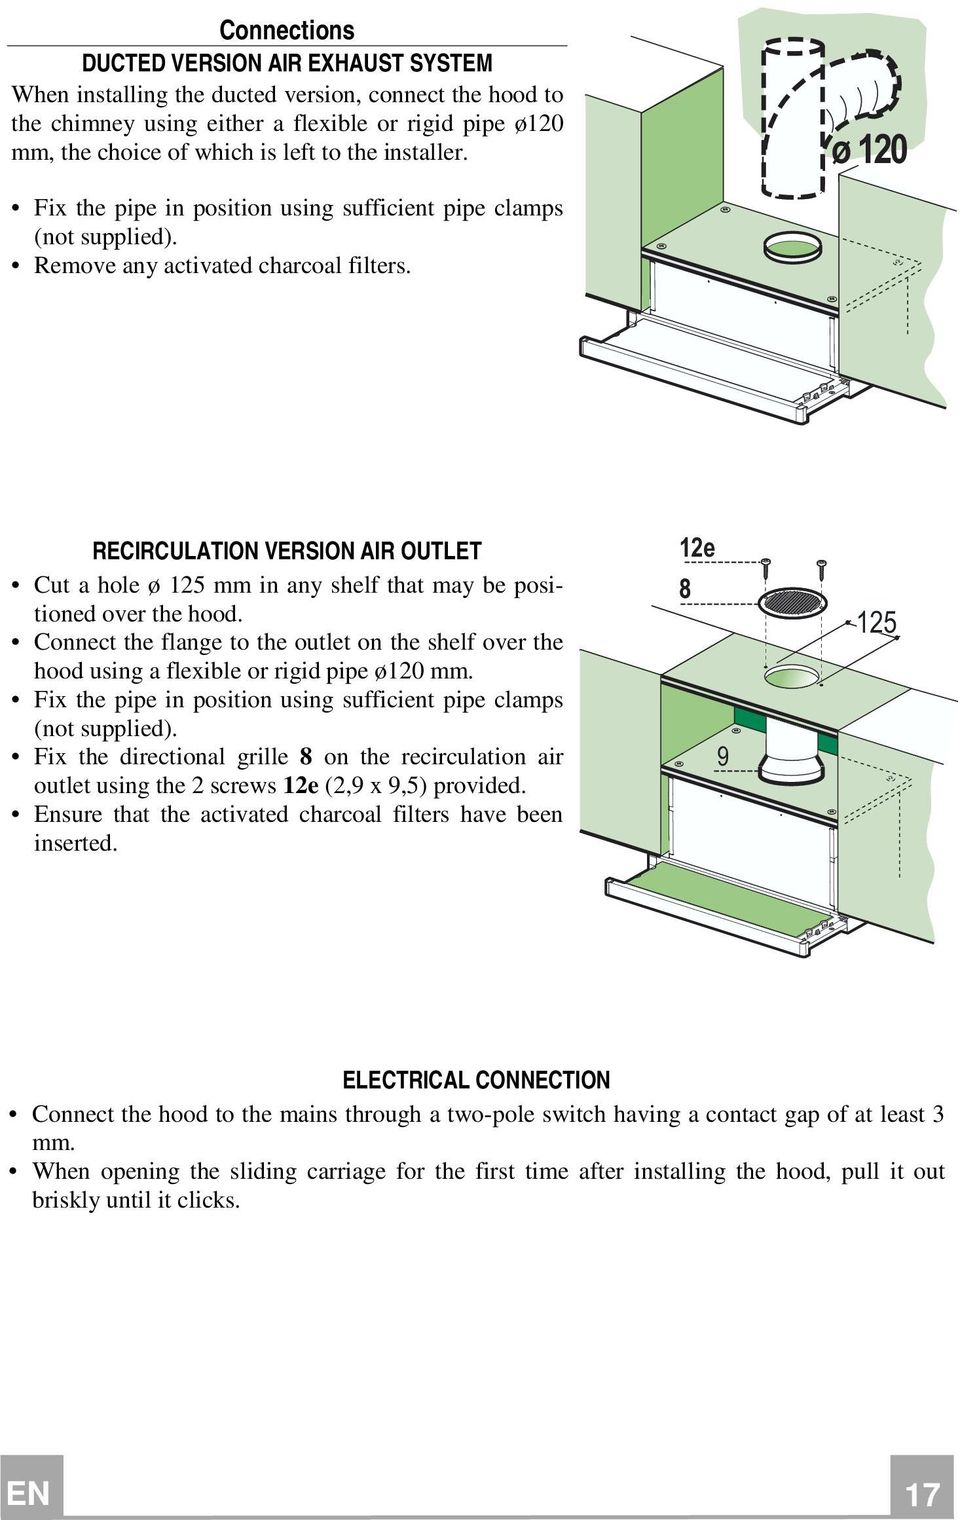 RECIRCULATION VERSION AIR OUTLET Cut a hole ø 125 mm in any shelf that may be positioned over the hood.